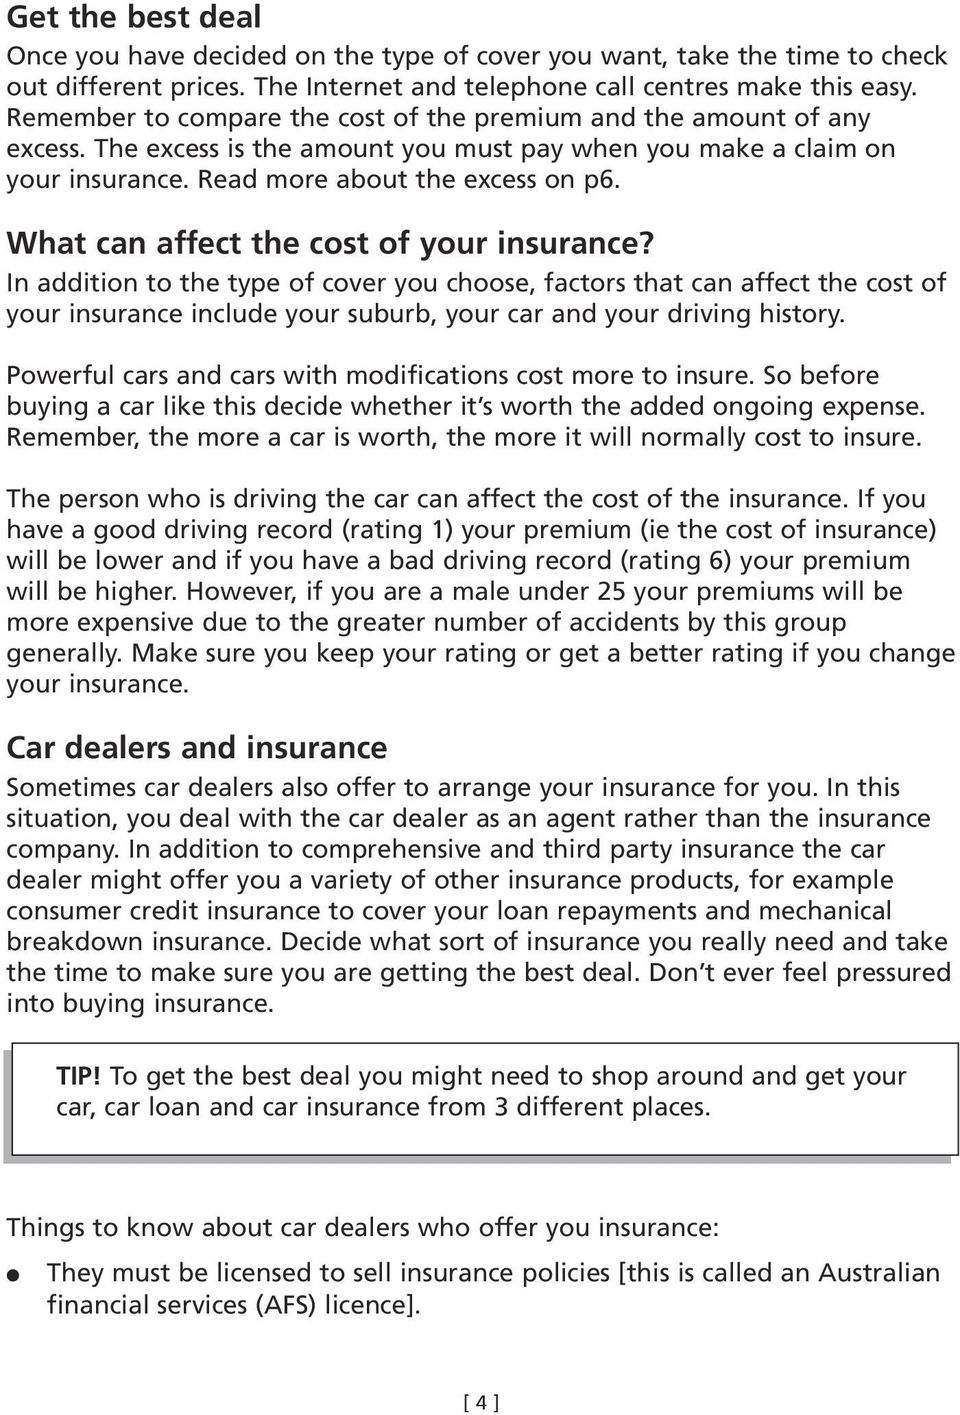 What can affect the cost of your insurance? In addition to the type of cover you choose, factors that can affect the cost of your insurance include your suburb, your car and your driving history.